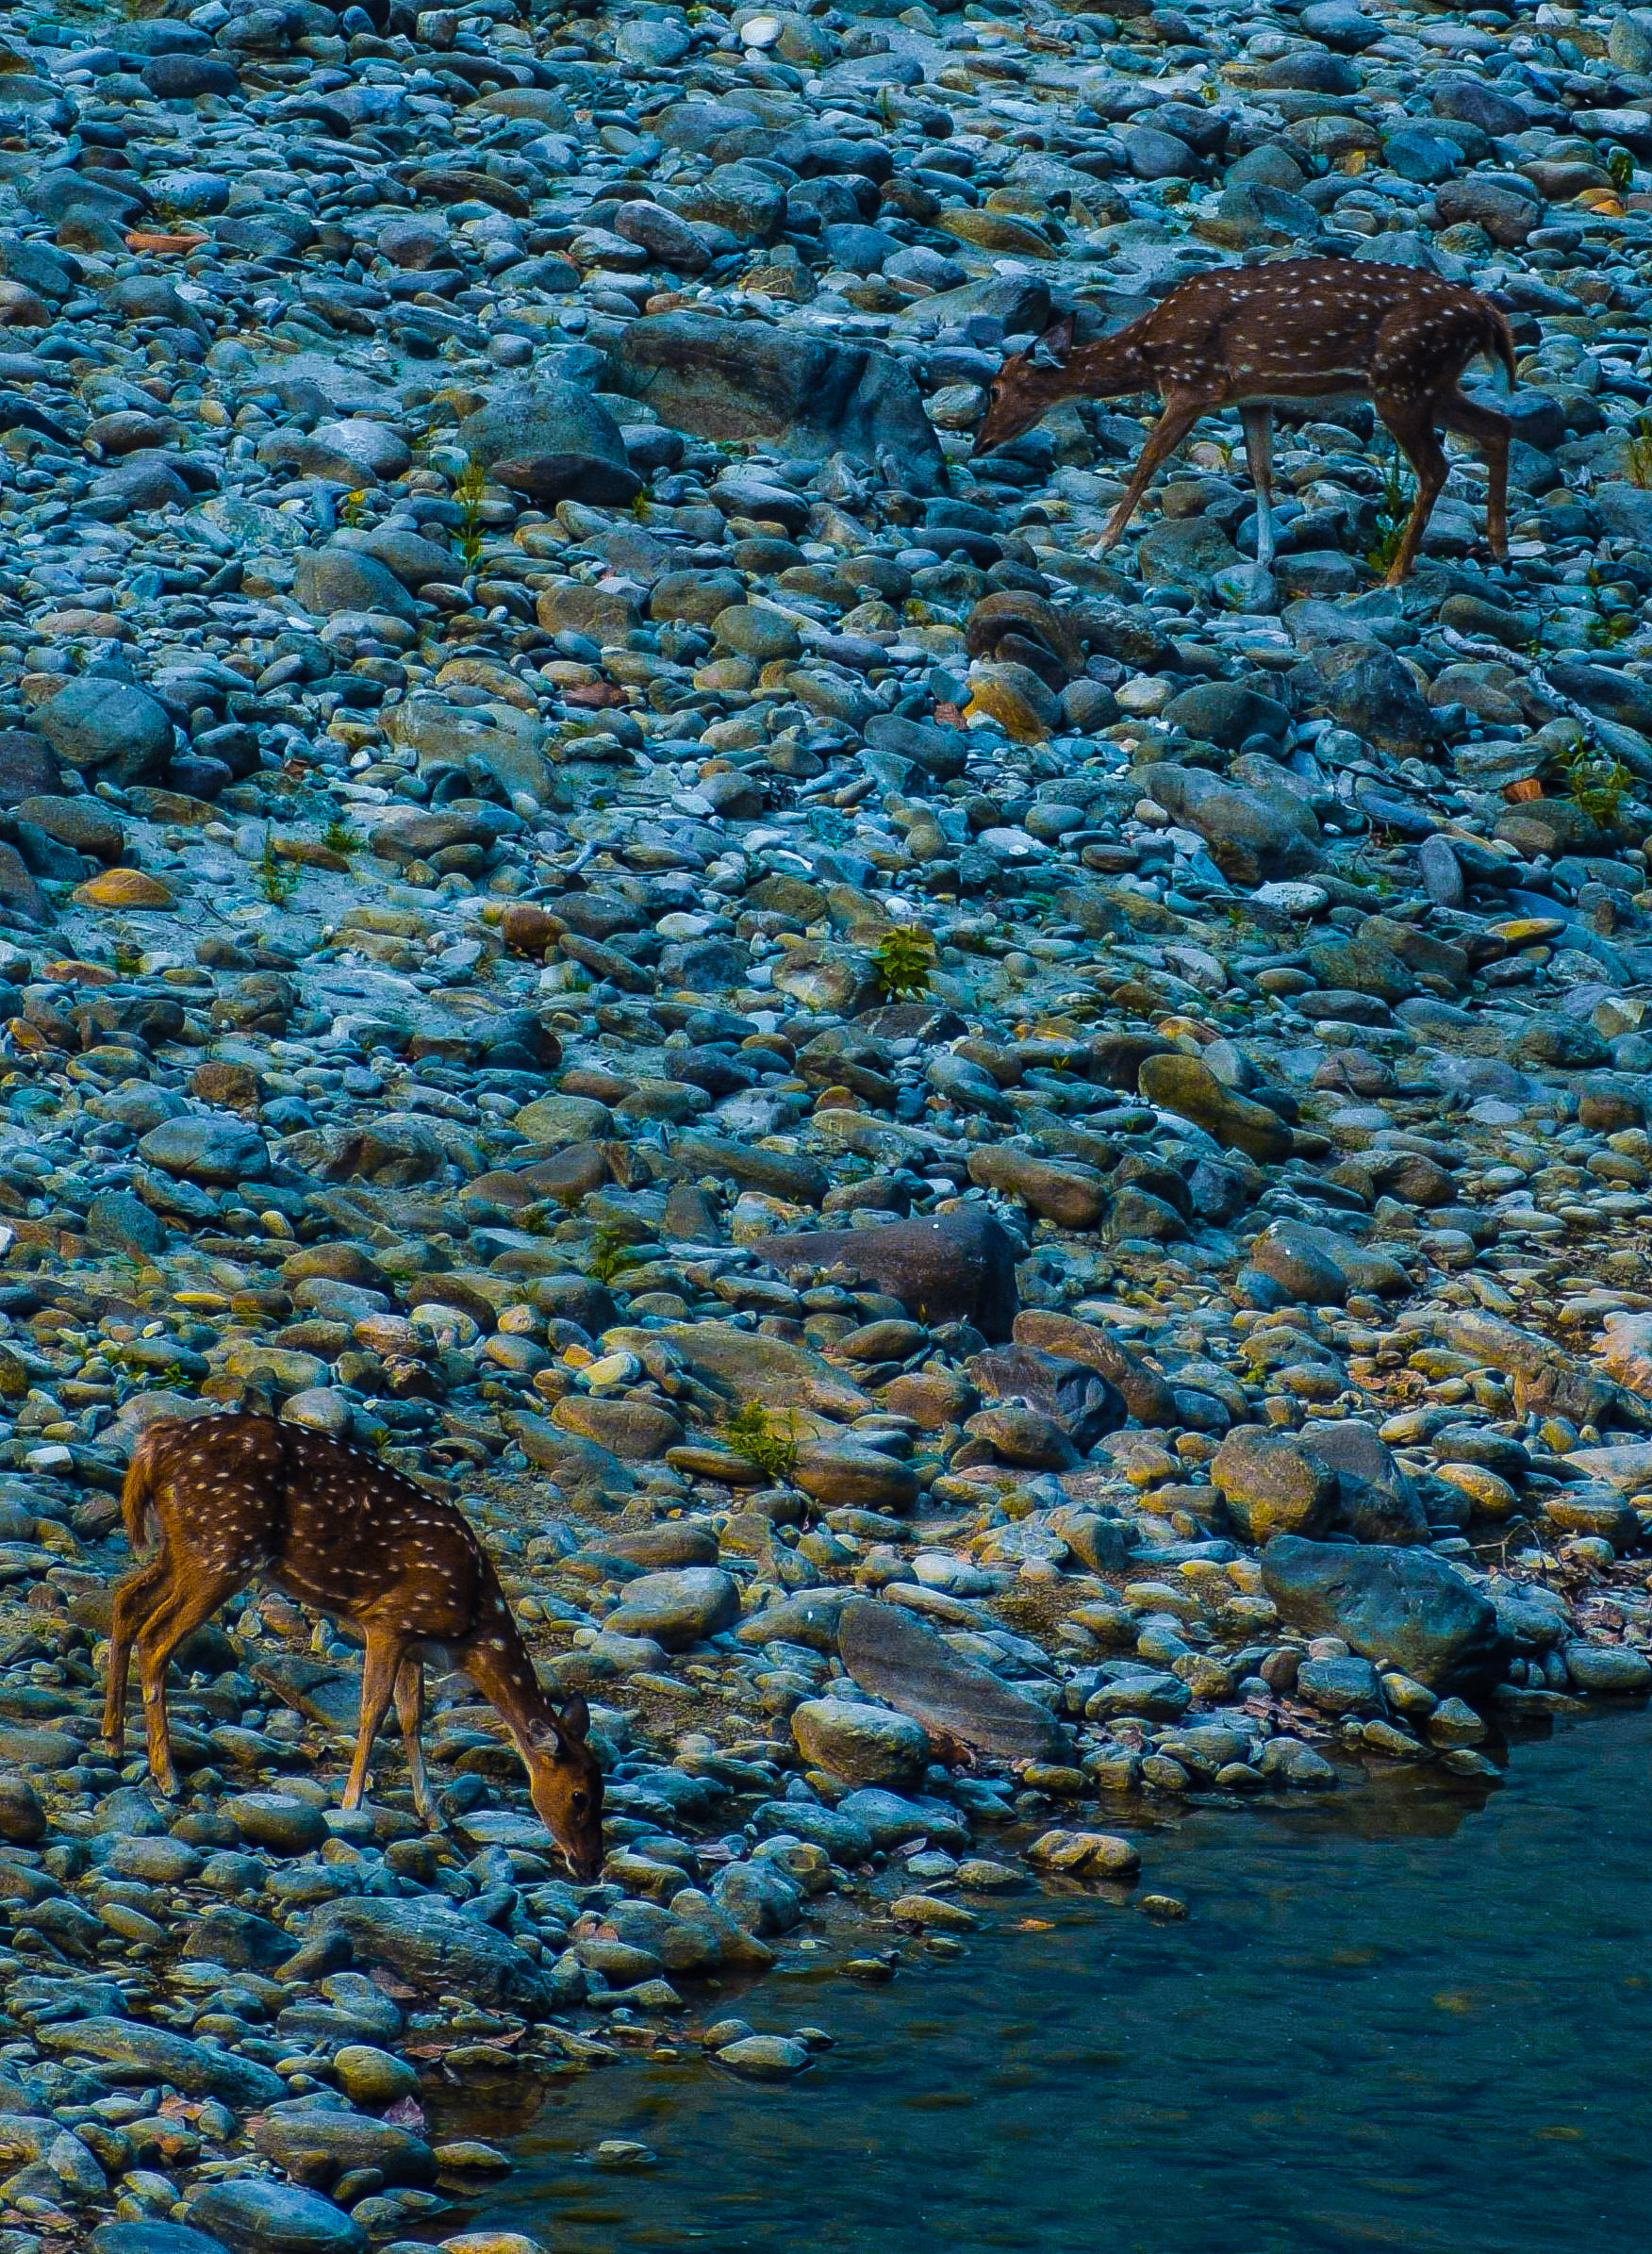 Female Chital or spotted deer near the river